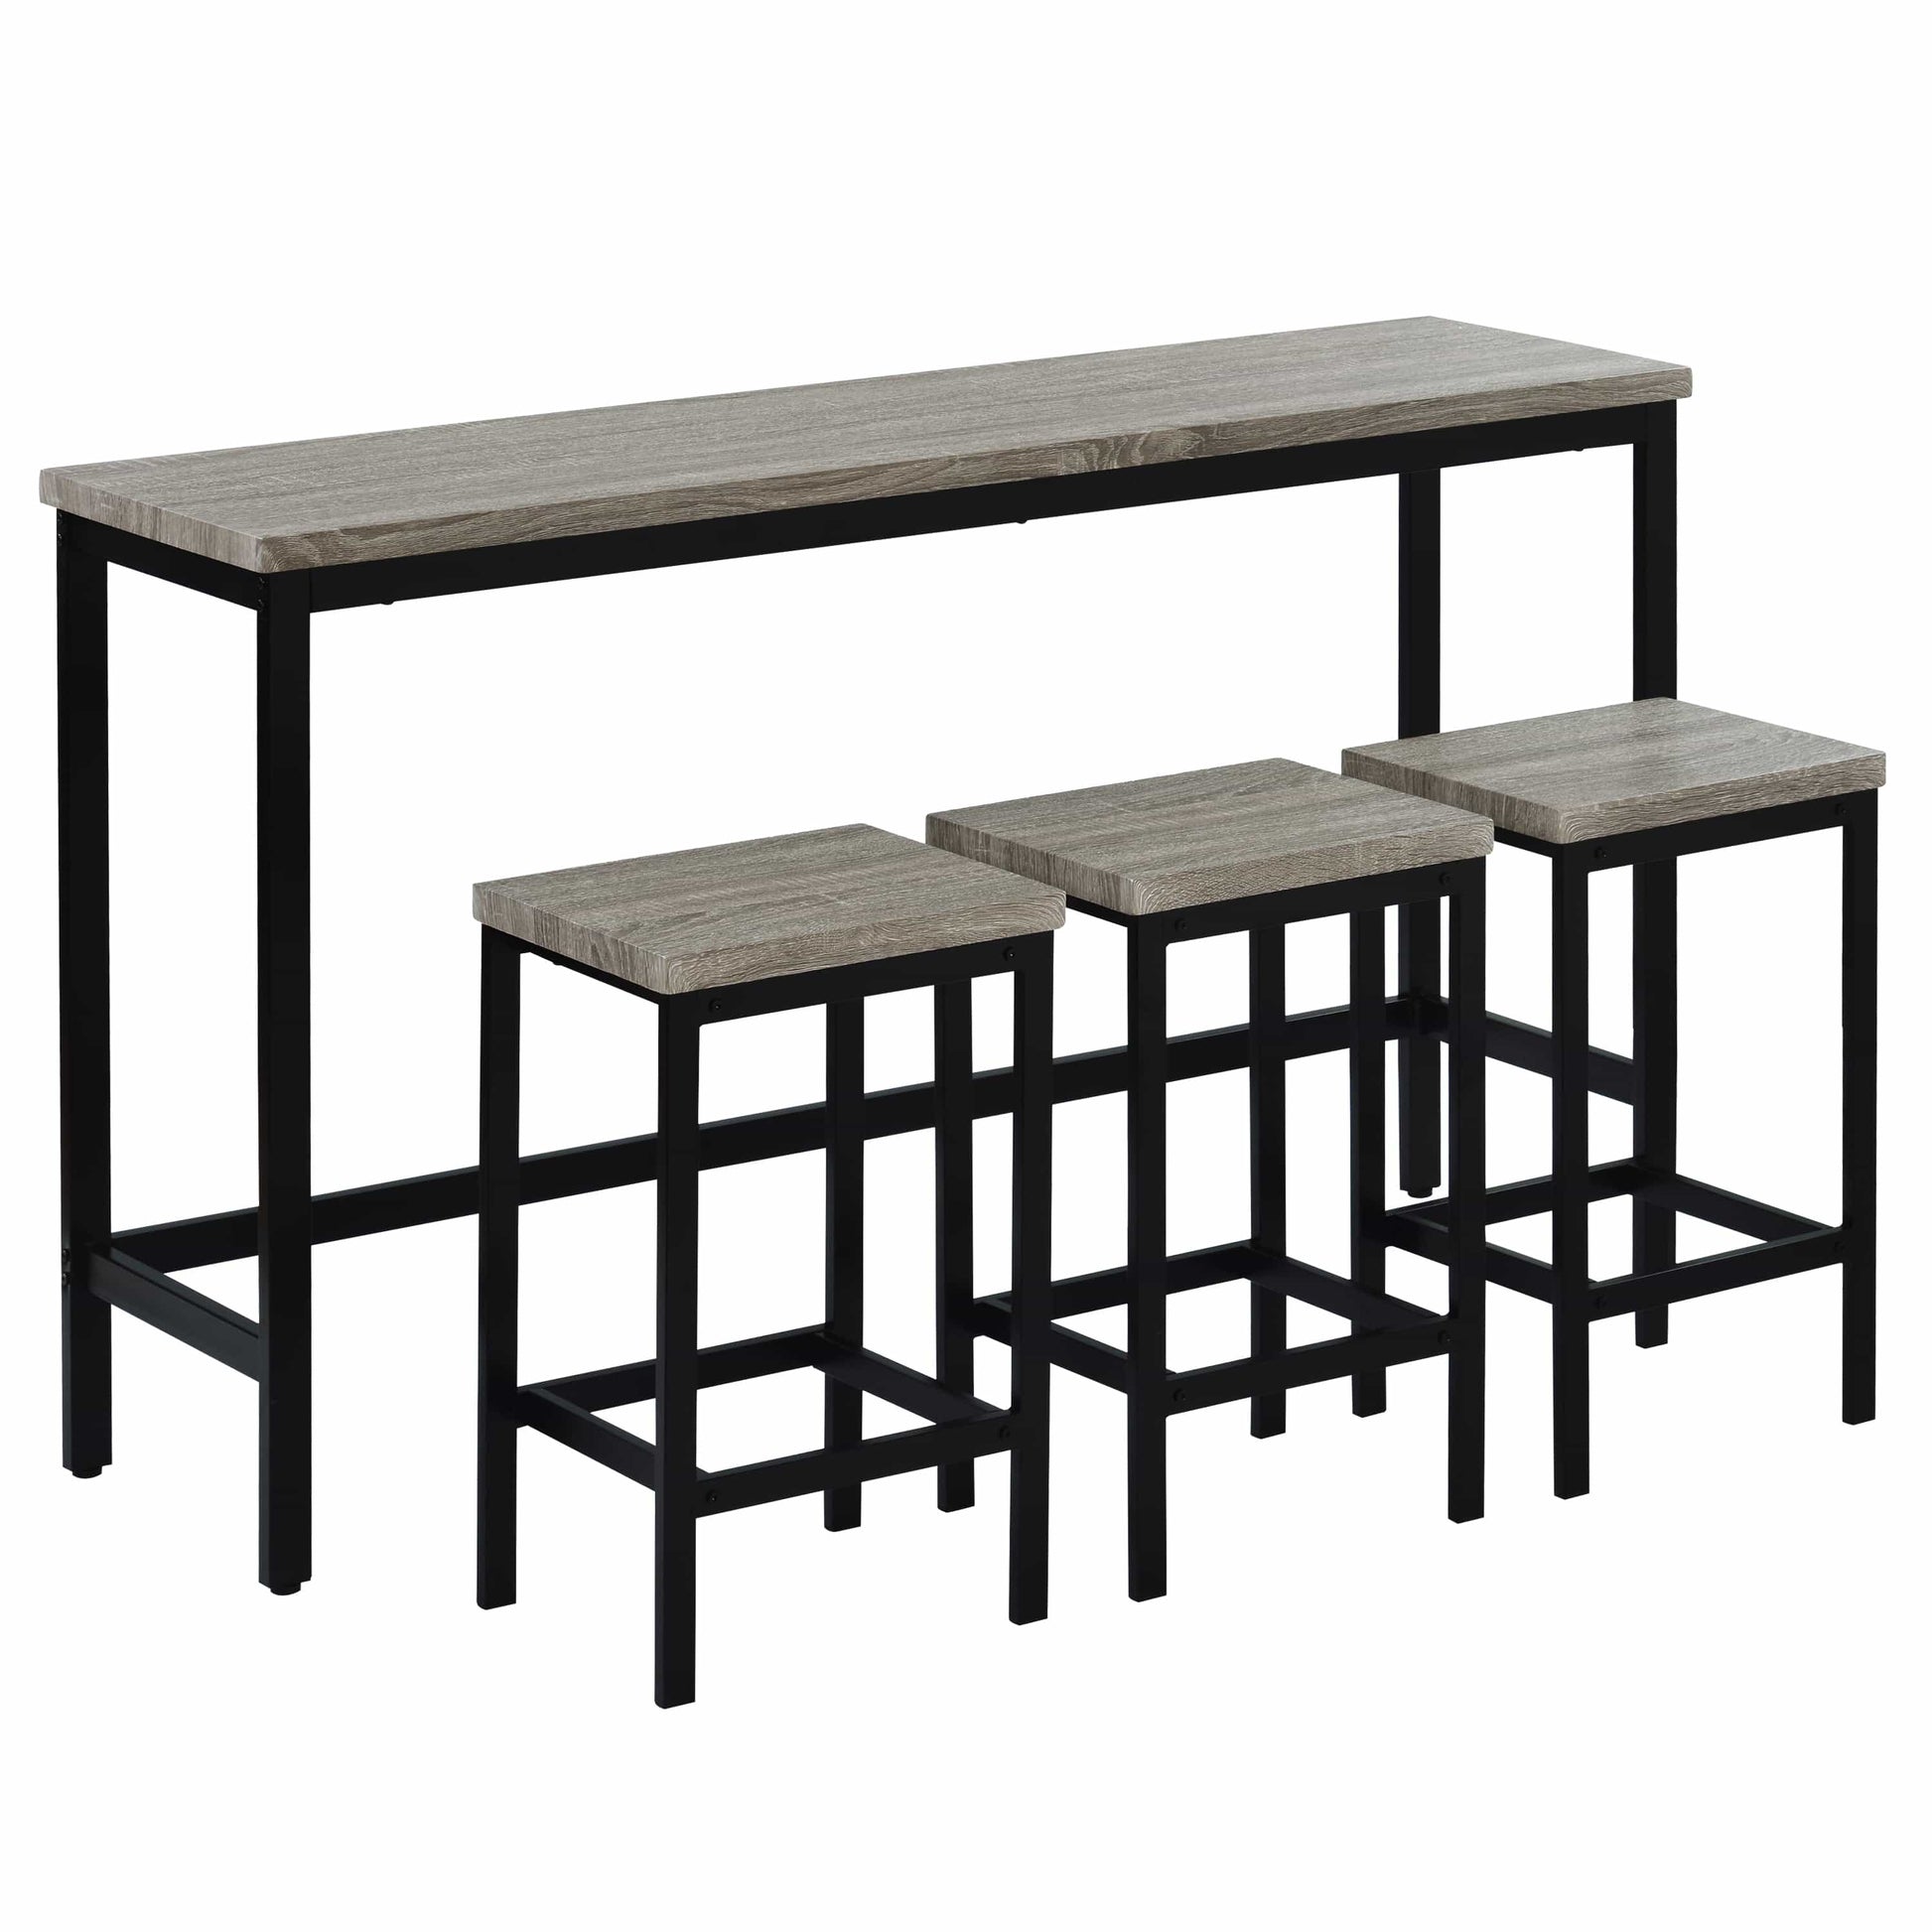 1st Choice Furniture Direct Counter Height Set 1st Choice Counter Height Dining Table Set with 3 Stool and Side Table